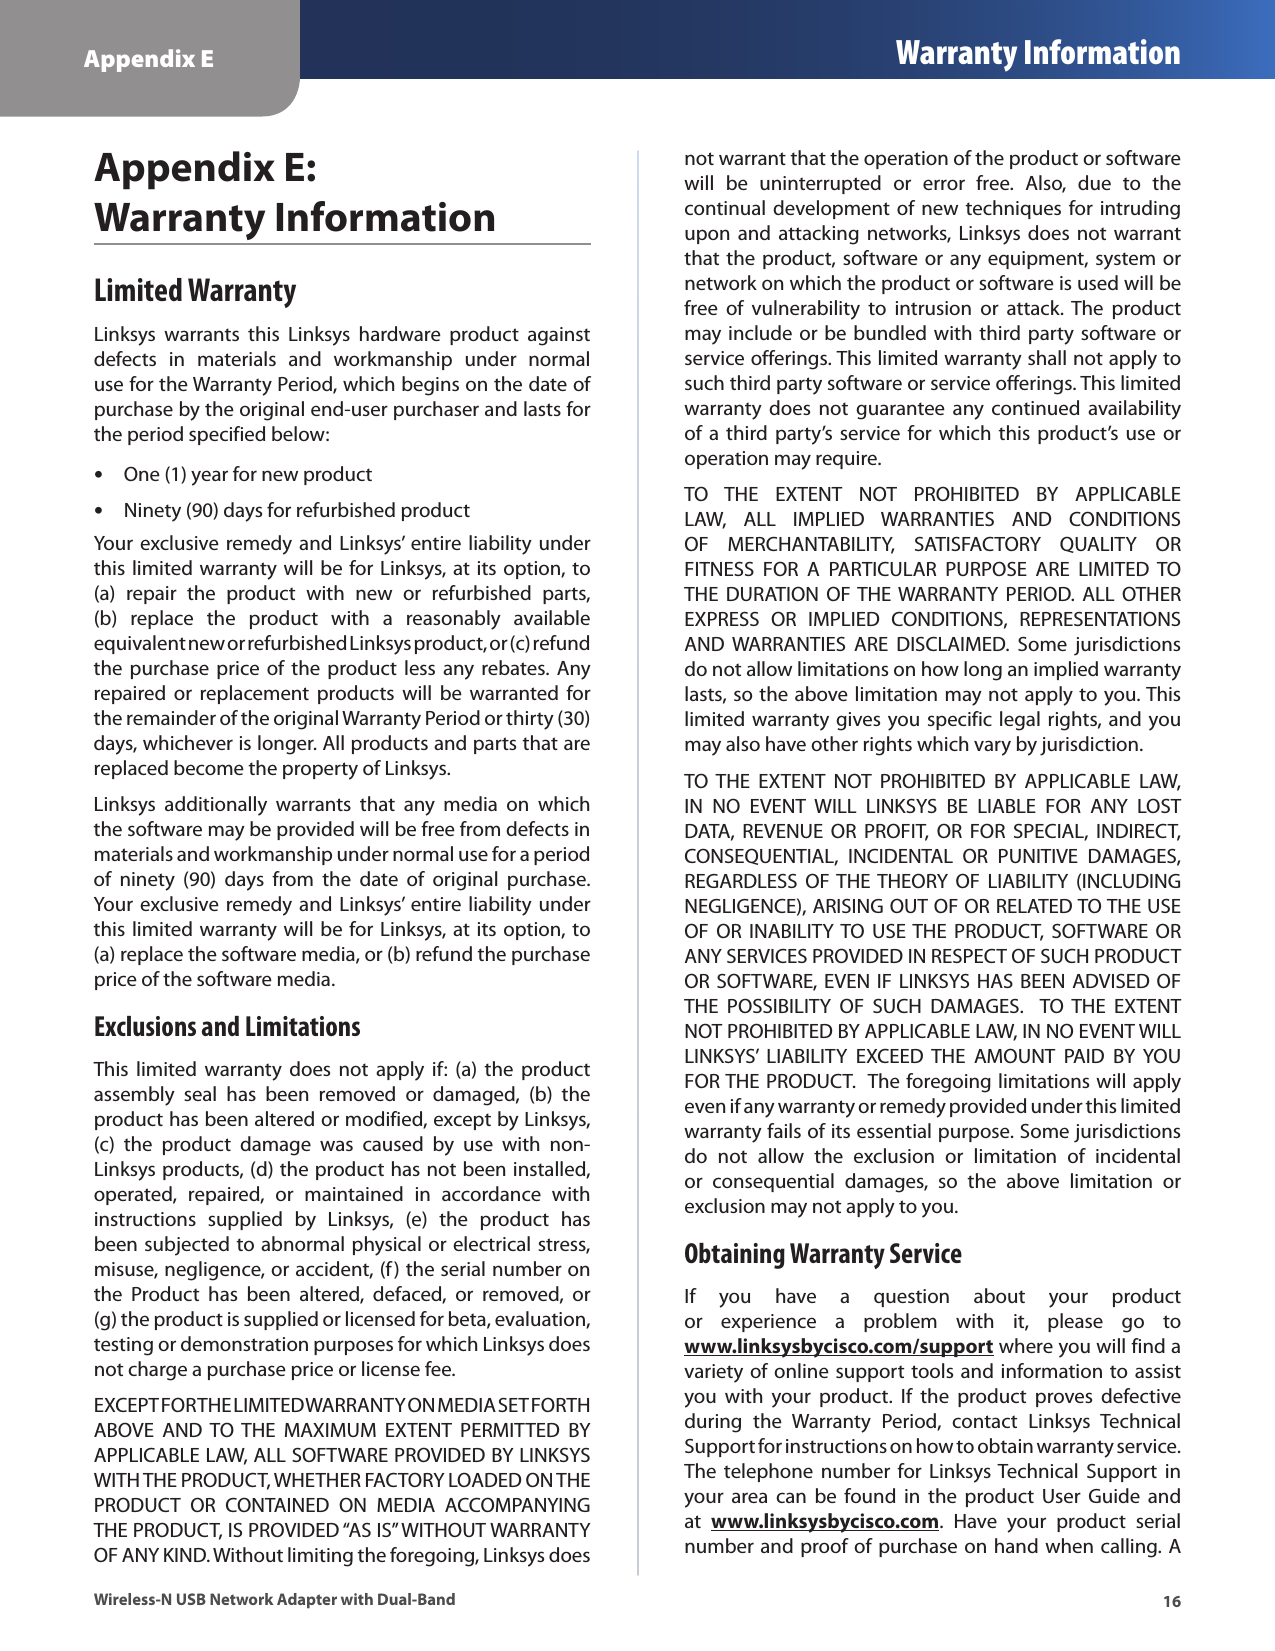 Appendix E Warranty Information16Wireless-N USB Network Adapter with Dual-BandAppendix E:  Warranty InformationLimited WarrantyLinksys  warrants  this  Linksys  hardware  product  against defects  in  materials  and  workmanship  under  normal use for the Warranty Period, which begins on the date of purchase by the original end-user purchaser and lasts for the period specified below: •One (1) year for new product •Ninety (90) days for refurbished productYour  exclusive remedy and Linksys’ entire liability under this limited warranty will be for Linksys, at its option, to (a)  repair  the  product  with  new  or  refurbished  parts, (b)  replace  the  product  with  a  reasonably  available equivalent new or refurbished Linksys product, or (c) refund the purchase  price of the  product  less any rebates. Any repaired or  replacement  products  will  be warranted  for the remainder of the original Warranty Period or thirty (30) days, whichever is longer. All products and parts that are replaced become the property of Linksys.Linksys  additionally  warrants  that  any  media  on  which the software may be provided will be free from defects in materials and workmanship under normal use for a period of  ninety  (90)  days  from  the  date  of  original  purchase.  Your  exclusive remedy and Linksys’ entire liability under this limited warranty will be for Linksys, at its option, to (a) replace the software media, or (b) refund the purchase price of the software media.Exclusions and LimitationsThis  limited  warranty  does  not  apply  if:  (a) the  product assembly  seal  has  been  removed  or  damaged,  (b)  the product has been altered or modified, except by Linksys, (c)  the  product  damage  was  caused  by  use  with  non-Linksys products, (d) the product has not been installed, operated,  repaired,  or  maintained  in  accordance  with instructions  supplied  by  Linksys,  (e)  the  product  has been subjected to abnormal physical or electrical stress, misuse, negligence, or accident, (f) the serial number on the  Product  has  been  altered,  defaced,  or  removed,  or (g) the product is supplied or licensed for beta, evaluation, testing or demonstration purposes for which Linksys does not charge a purchase price or license fee.EXCEPT FOR THE LIMITED WARRANTY ON MEDIA SET FORTH ABOVE  AND  TO THE  MAXIMUM  EXTENT  PERMITTED  BY APPLICABLE LAW, ALL SOFTWARE PROVIDED BY LINKSYS WITH THE PRODUCT, WHETHER FACTORY LOADED ON THE PRODUCT  OR  CONTAINED  ON  MEDIA  ACCOMPANYING THE PRODUCT, IS PROVIDED “AS IS” WITHOUT WARRANTY OF ANY KIND. Without limiting the foregoing, Linksys does not warrant that the operation of the product or software will  be  uninterrupted  or  error  free.  Also,  due  to  the continual development of new techniques for intruding upon and  attacking  networks, Linksys does  not warrant that the product, software or any equipment, system or network on which the product or software is used will be free  of  vulnerability  to  intrusion  or  attack.  The  product may include or be bundled with third party software or service offerings. This limited warranty shall not apply to such third party software or service offerings. This limited warranty  does  not  guarantee  any  continued  availability of a  third party’s  service  for  which this  product’s use  or operation may require. TO  THE  EXTENT  NOT  PROHIBITED  BY  APPLICABLE LAW,  ALL  IMPLIED  WARRANTIES  AND  CONDITIONS OF  MERCHANTABILITY,  SATISFACTORY  QUALITY  OR FITNESS  FOR  A  PARTICULAR  PURPOSE  ARE  LIMITED  TO THE  DURATION  OF THE WARRANTY  PERIOD.  ALL OTHER EXPRESS  OR  IMPLIED  CONDITIONS,  REPRESENTATIONS AND  WARRANTIES  ARE  DISCLAIMED.  Some  jurisdictions do not allow limitations on how long an implied warranty lasts, so the above limitation may not apply to you. This limited warranty gives you specific legal rights, and you may also have other rights which vary by jurisdiction.TO  THE  EXTENT  NOT  PROHIBITED  BY  APPLICABLE  LAW, IN  NO  EVENT  WILL  LINKSYS  BE  LIABLE  FOR  ANY  LOST DATA,  REVENUE  OR  PROFIT,  OR  FOR  SPECIAL,  INDIRECT, CONSEQUENTIAL,  INCIDENTAL  OR  PUNITIVE  DAMAGES, REGARDLESS  OF THE THEORY  OF  LIABILITY  (INCLUDING NEGLIGENCE), ARISING OUT OF OR RELATED TO THE USE OF  OR INABILITY TO USE THE  PRODUCT,  SOFTWARE OR ANY SERVICES PROVIDED IN RESPECT OF SUCH PRODUCT OR SOFTWARE, EVEN IF LINKSYS HAS BEEN ADVISED  OF THE  POSSIBILITY  OF  SUCH  DAMAGES.   TO  THE  EXTENT NOT PROHIBITED BY APPLICABLE LAW, IN NO EVENT WILL LINKSYS’  LIABILITY  EXCEED  THE  AMOUNT  PAID  BY  YOU FOR THE PRODUCT.  The foregoing limitations will apply even if any warranty or remedy provided under this limited warranty fails of its essential purpose. Some jurisdictions do  not  allow  the  exclusion  or  limitation  of  incidental or  consequential  damages,  so  the  above  limitation  or exclusion may not apply to you.Obtaining Warranty ServiceIf  you  have  a  question  about  your  product or  experience  a  problem  with  it,  please  go  to www.linksysbycisco.com/support where you will find a variety of online support tools and information to assist you  with  your  product.  If  the  product  proves  defective during  the  Warranty  Period,  contact  Linksys  Technical Support for instructions on how to obtain warranty service. The  telephone  number  for  Linksys Technical  Support  in your  area  can  be  found  in  the  product  User  Guide  and at  www.linksysbycisco.com.  Have  your  product  serial number and proof of purchase on hand when calling. A 